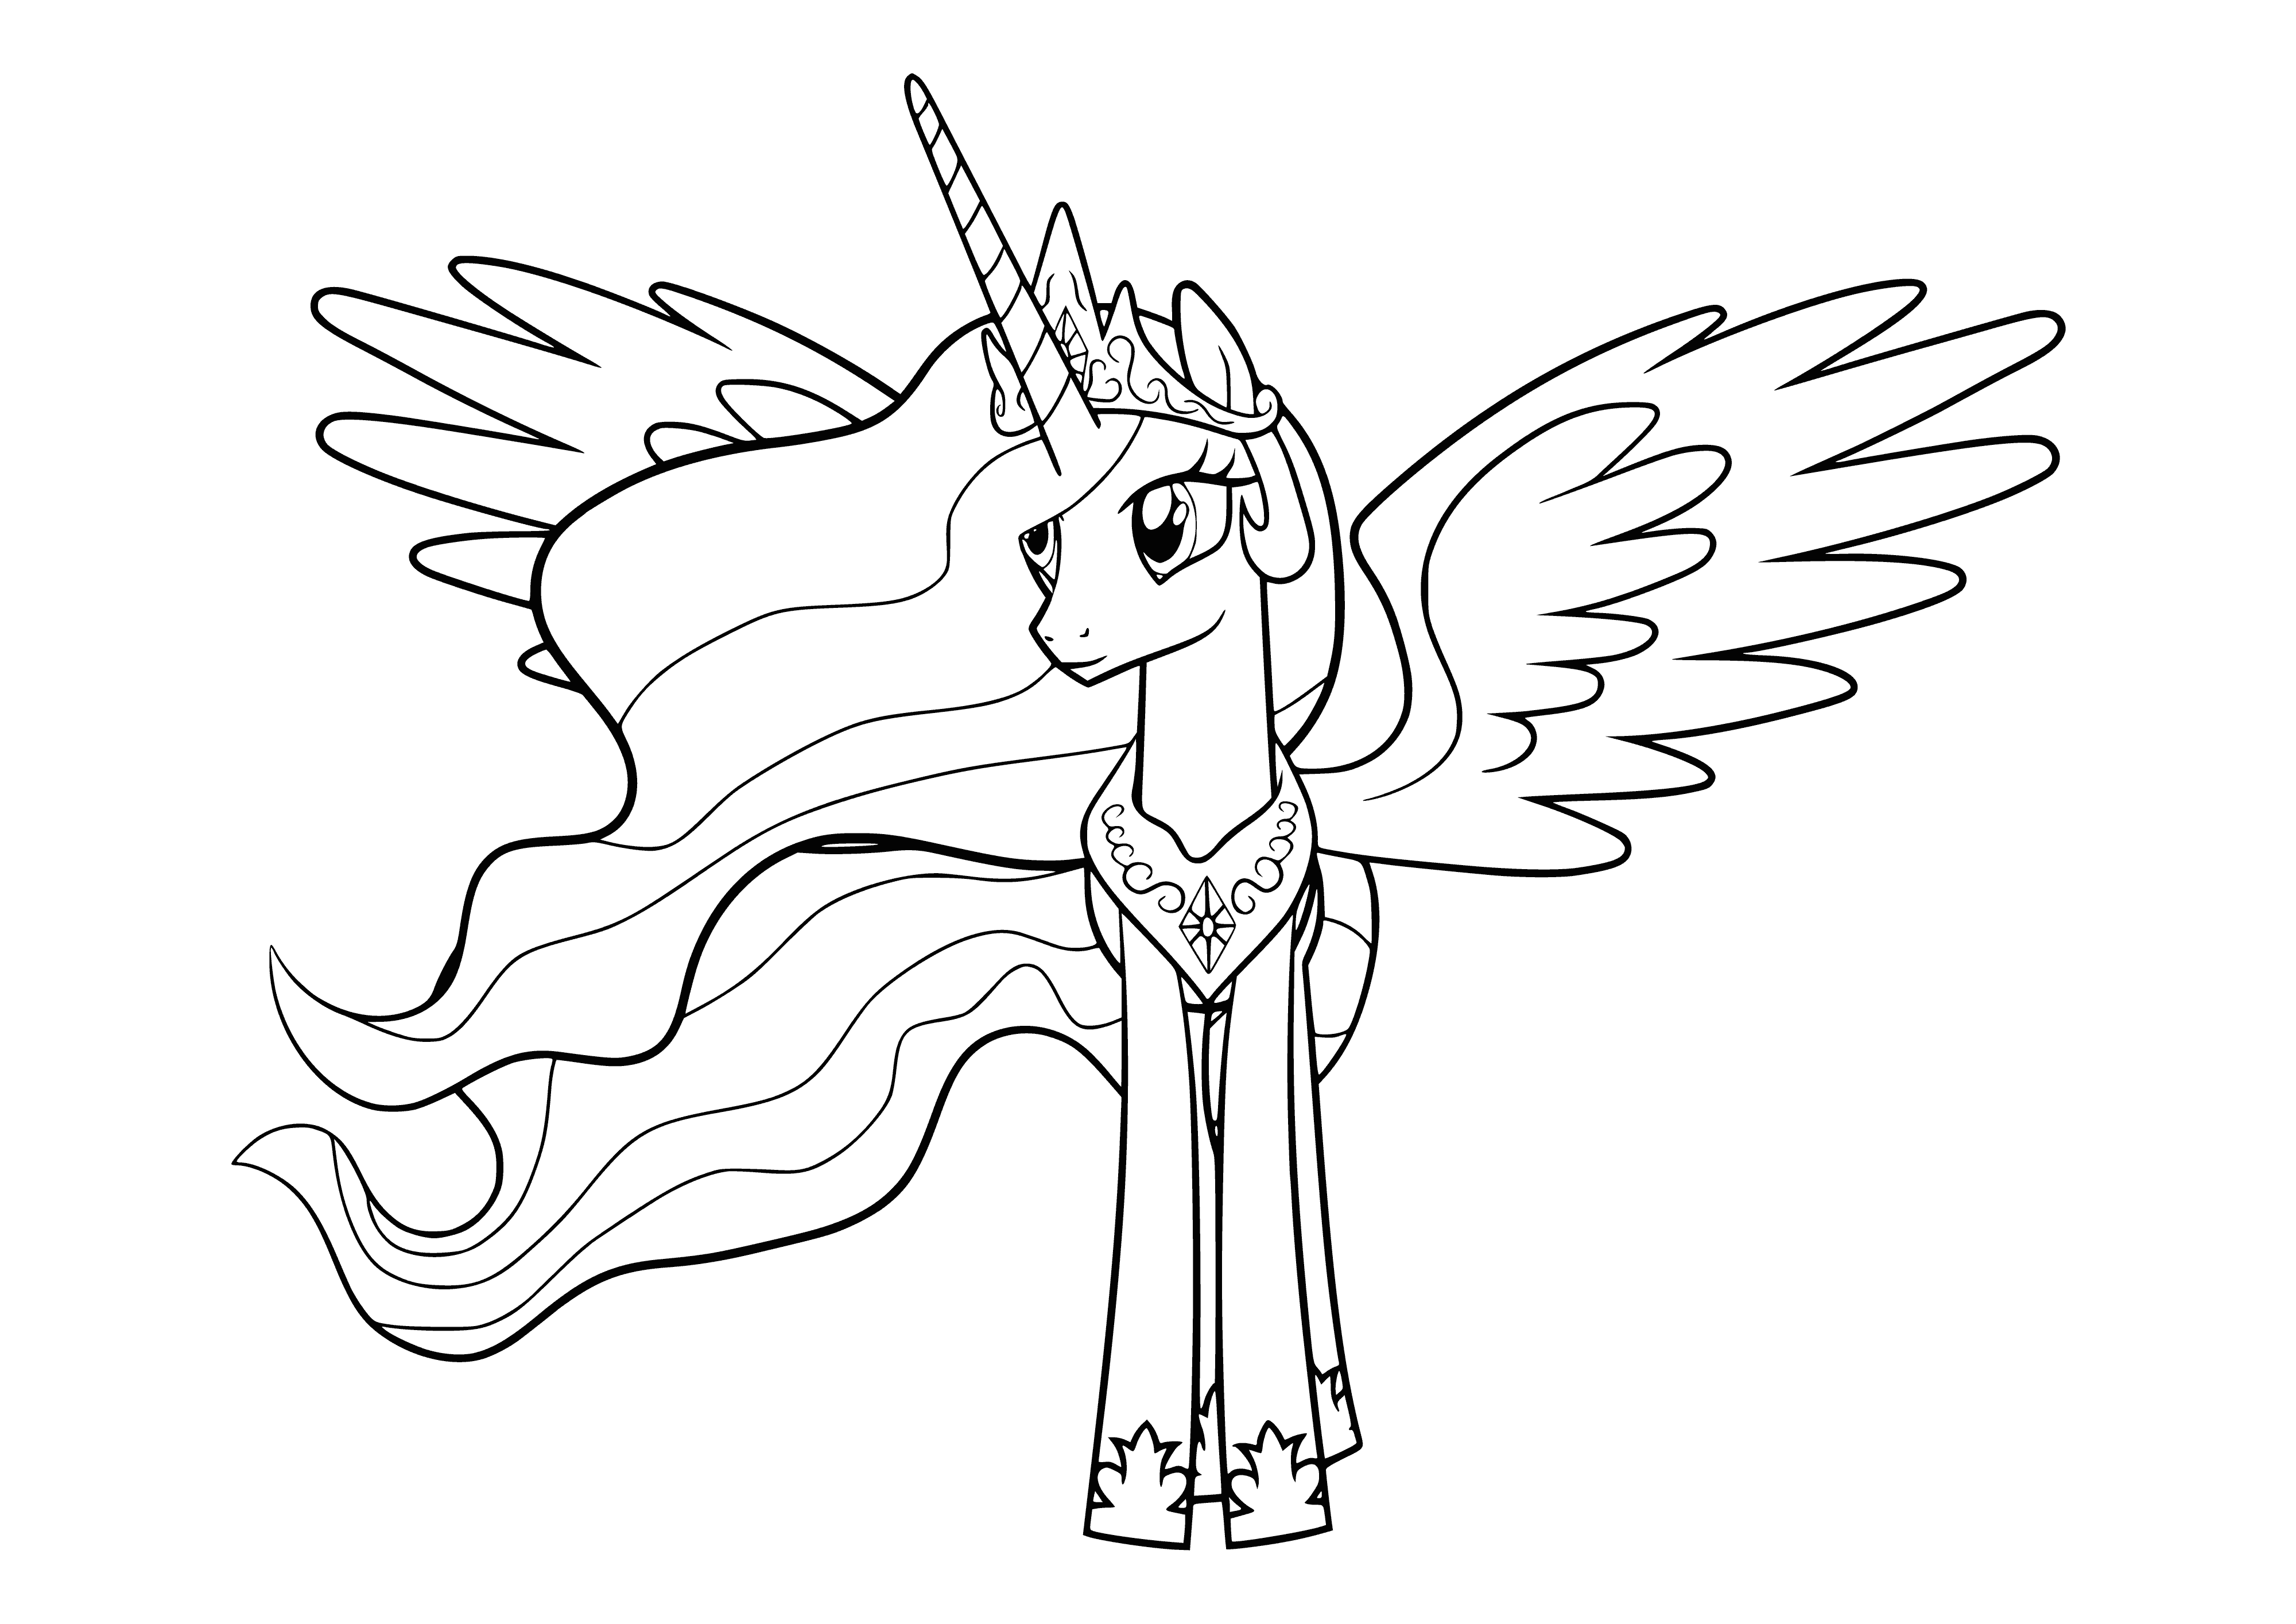 coloring page: A majestic white unicorn stands before the sun, gold mane/tail sparkling. Kind eyes full of wisdom and compassion.